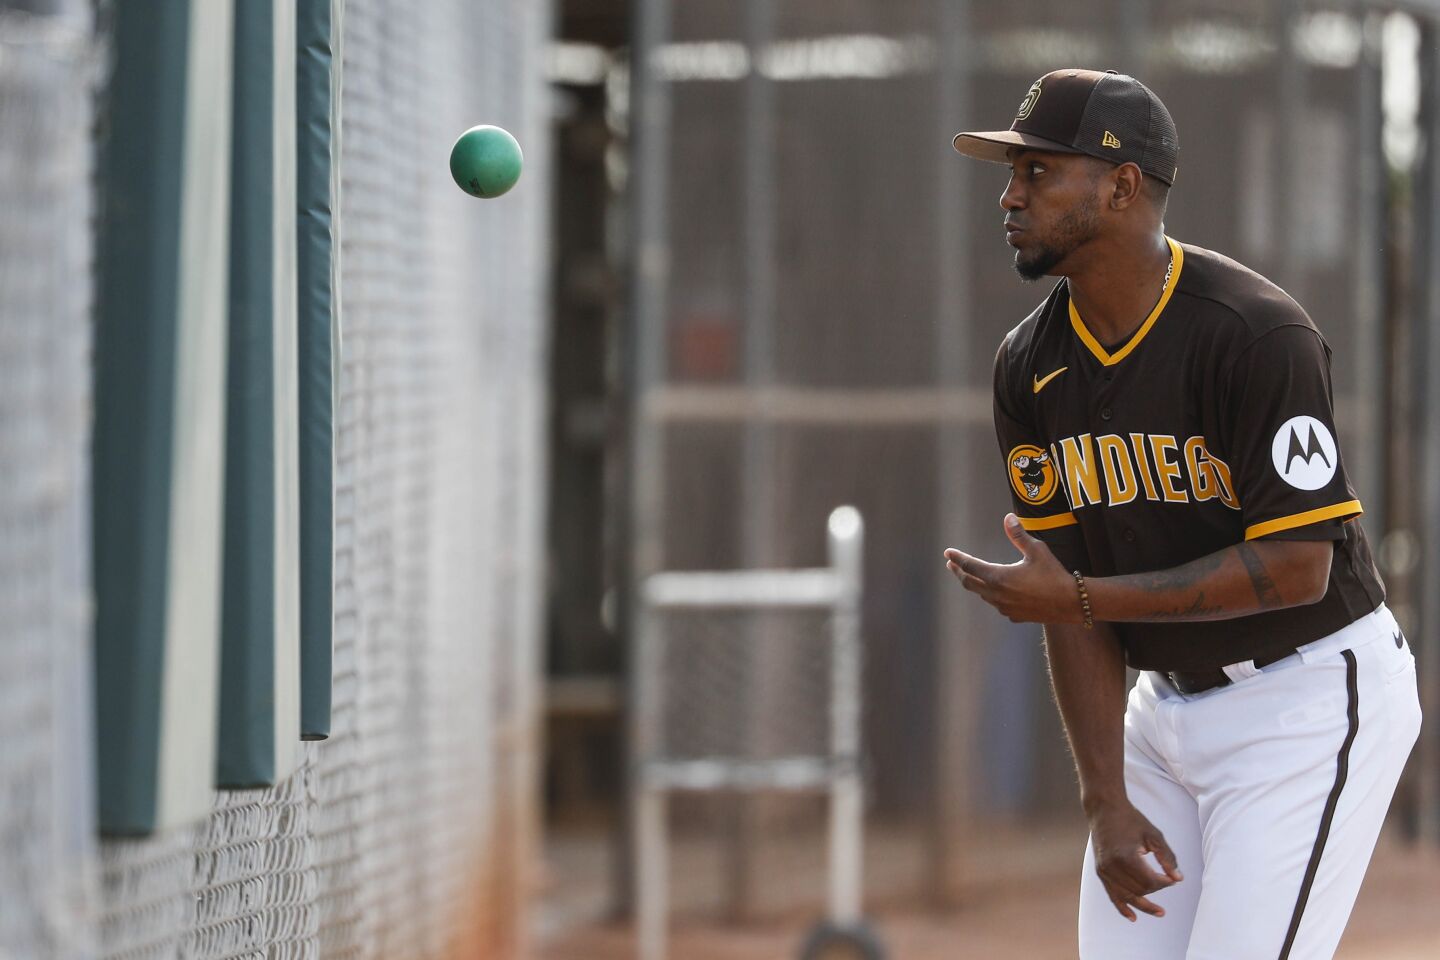 Padres pitcher Julio Teheran throws a medicine ball during a spring training practice at Peoria Sports Complex on Friday.